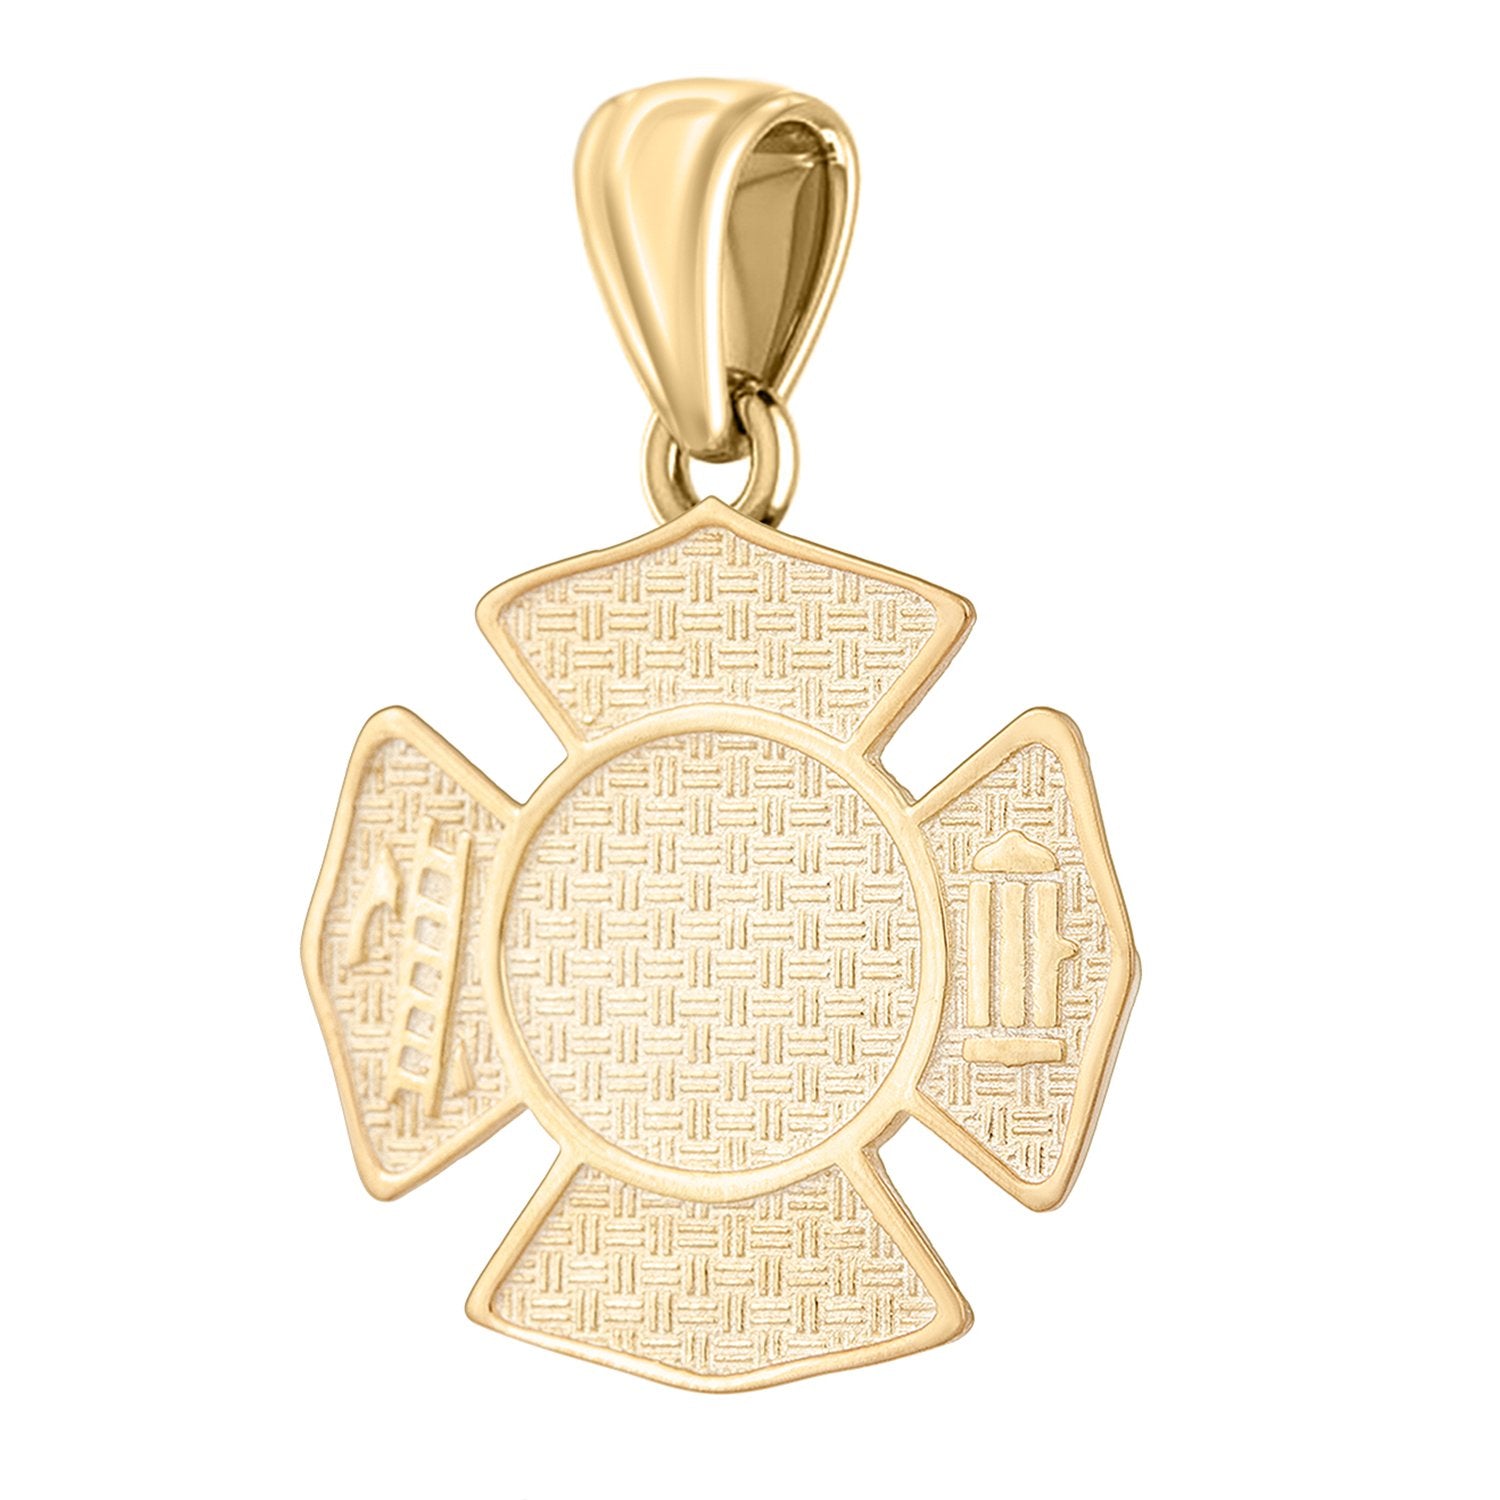 Firefighter Pendant In 14K Gold - No Chain